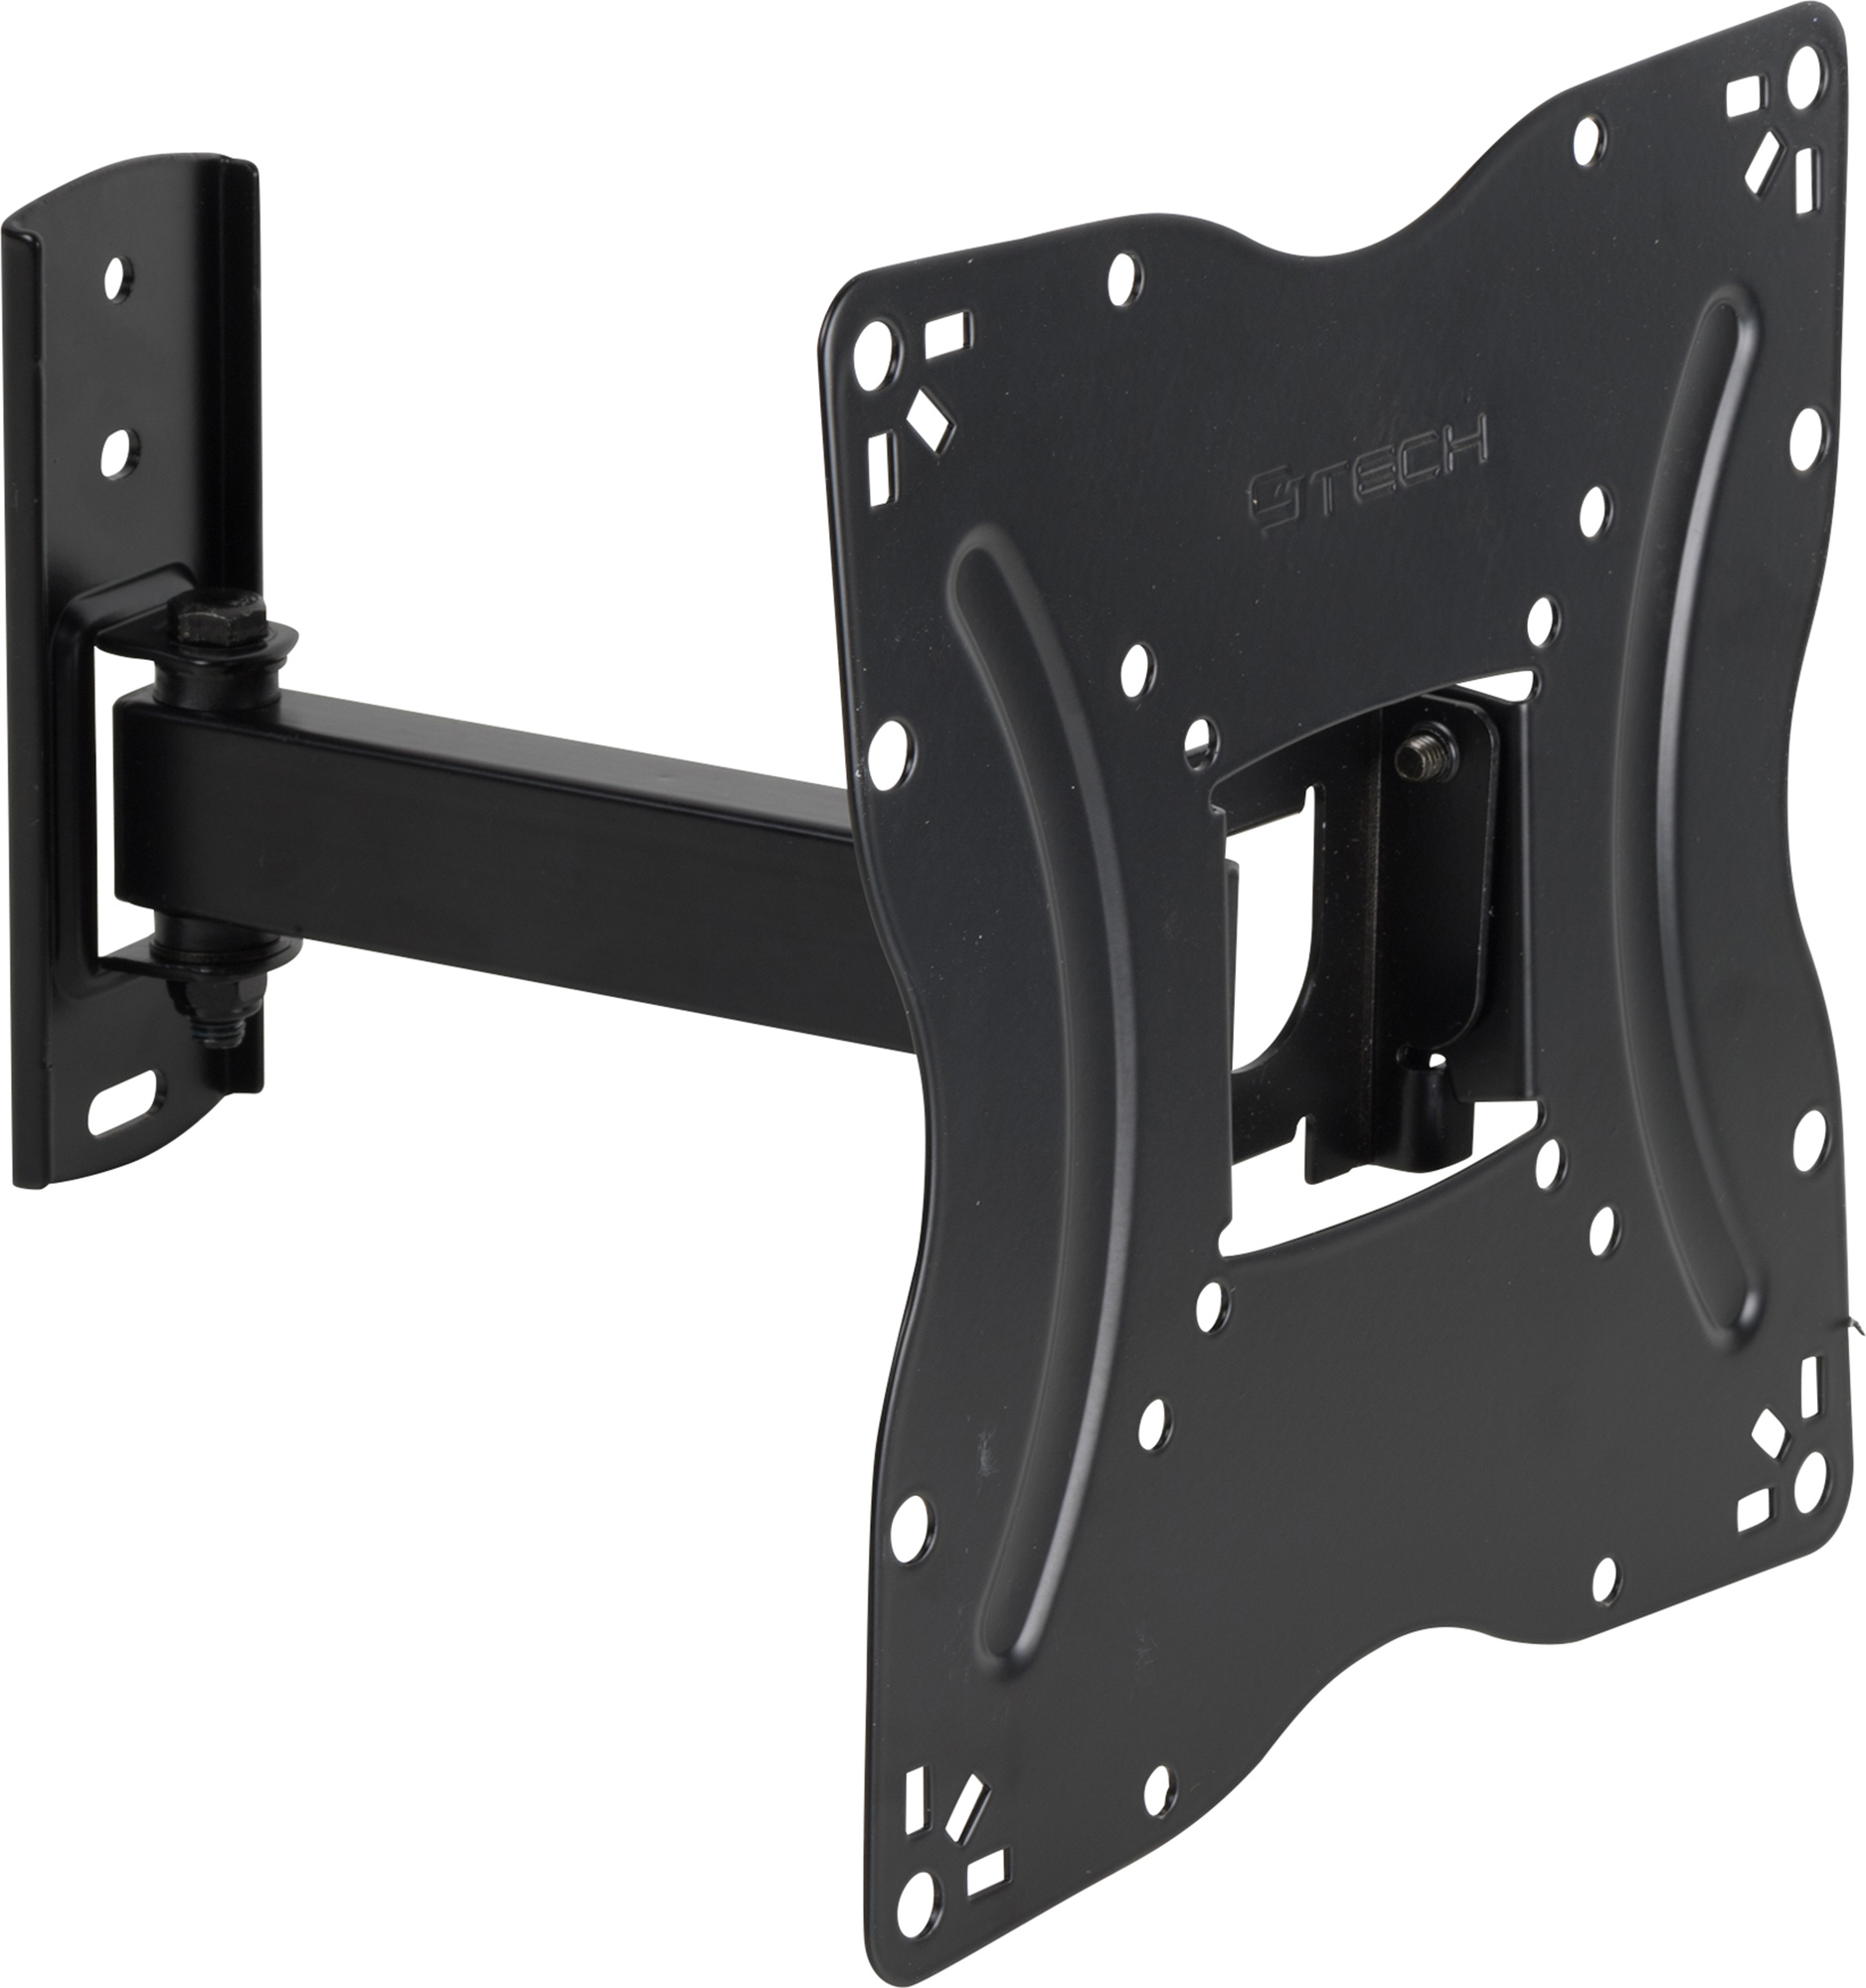 17-42 inch Full Motion Swivel Tv Wall Mount Bracket - Click Image to Close